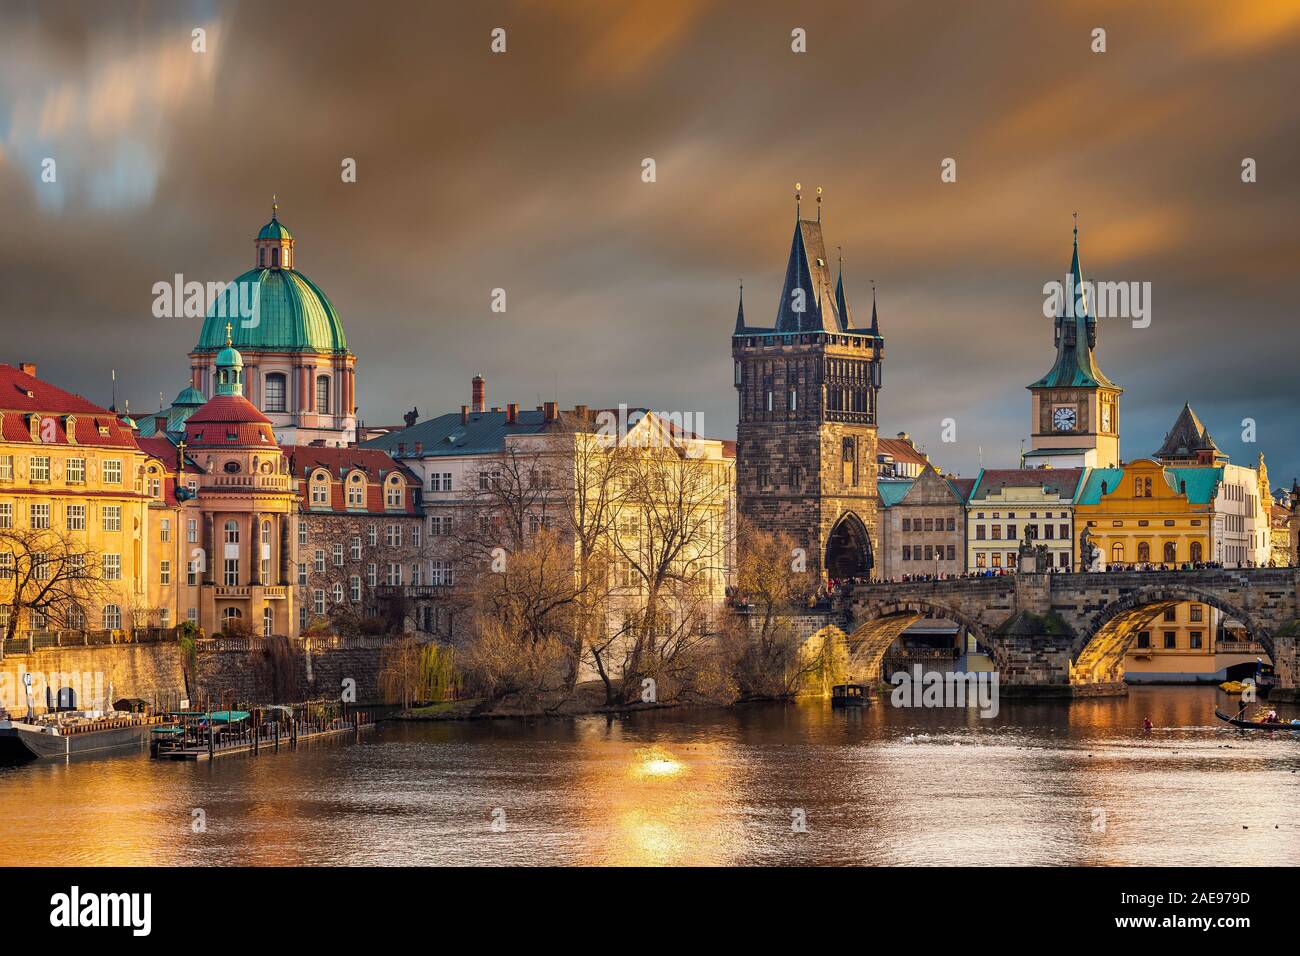 Prague, Czech Republic - The world famous Charles Bridge (Karluv most) with St. Francis of Assisi Church and clocktower with beautiful golden sunset l Stock Photo